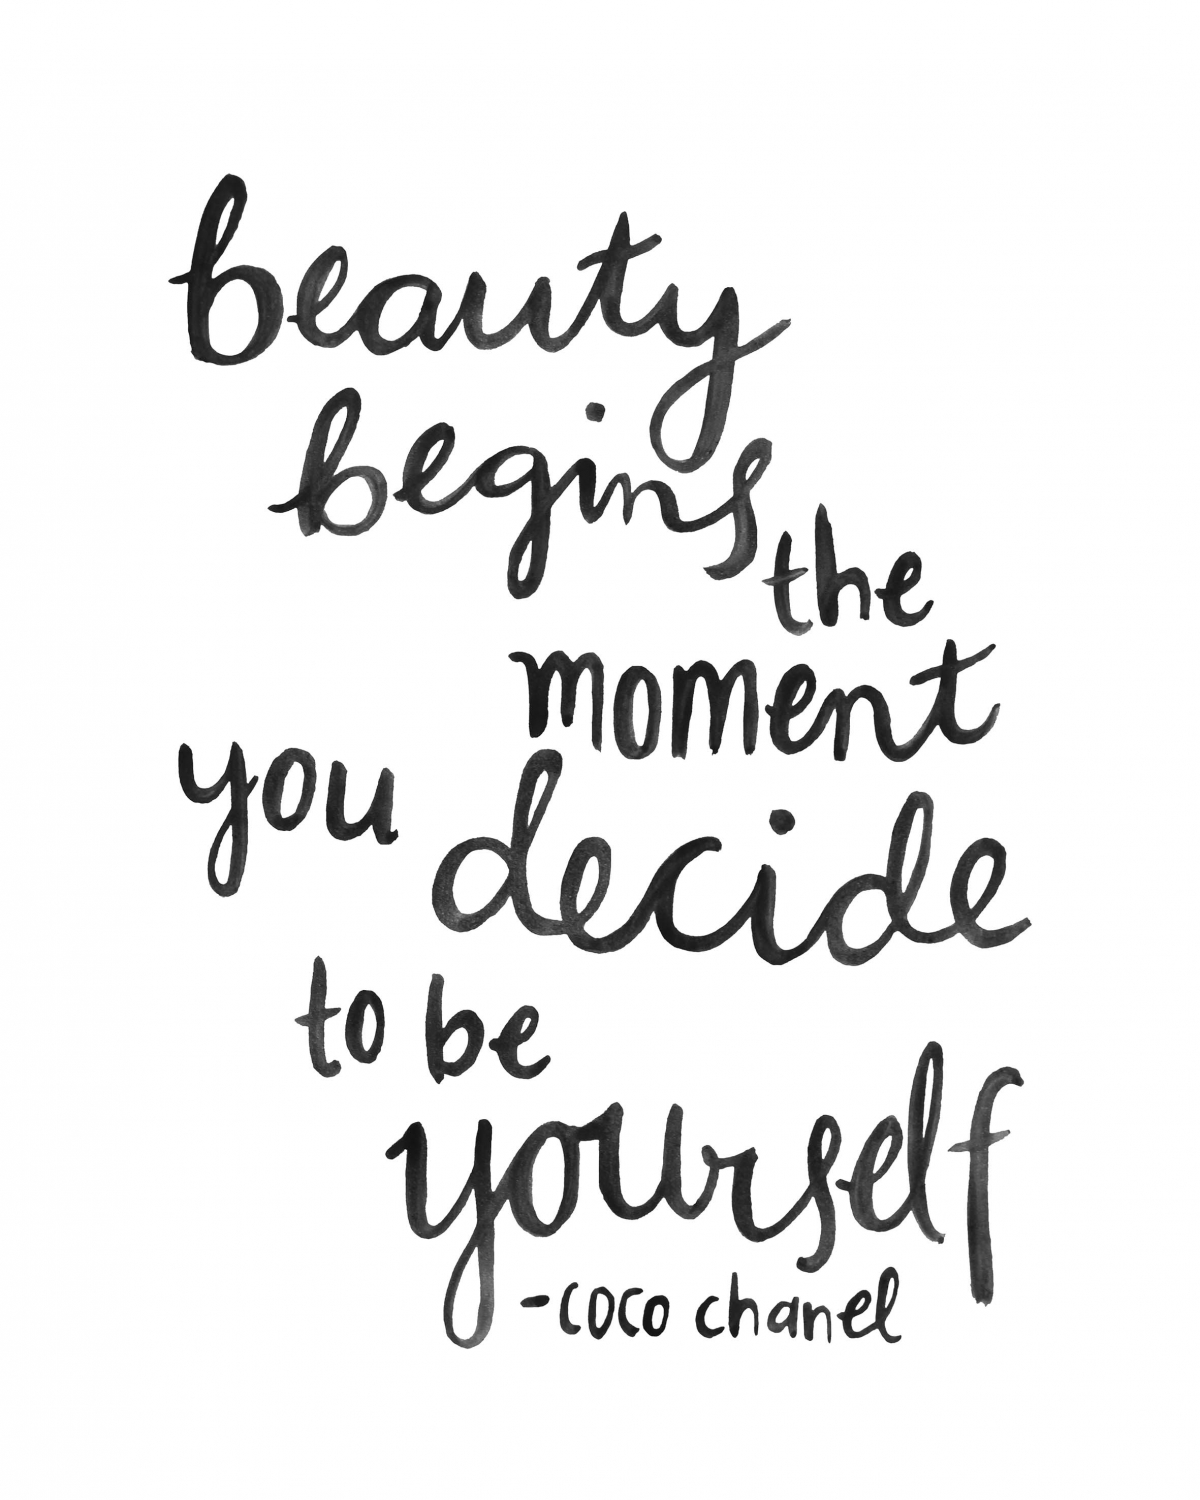 Coco Chanel Quotes About Beauty. QuotesGram